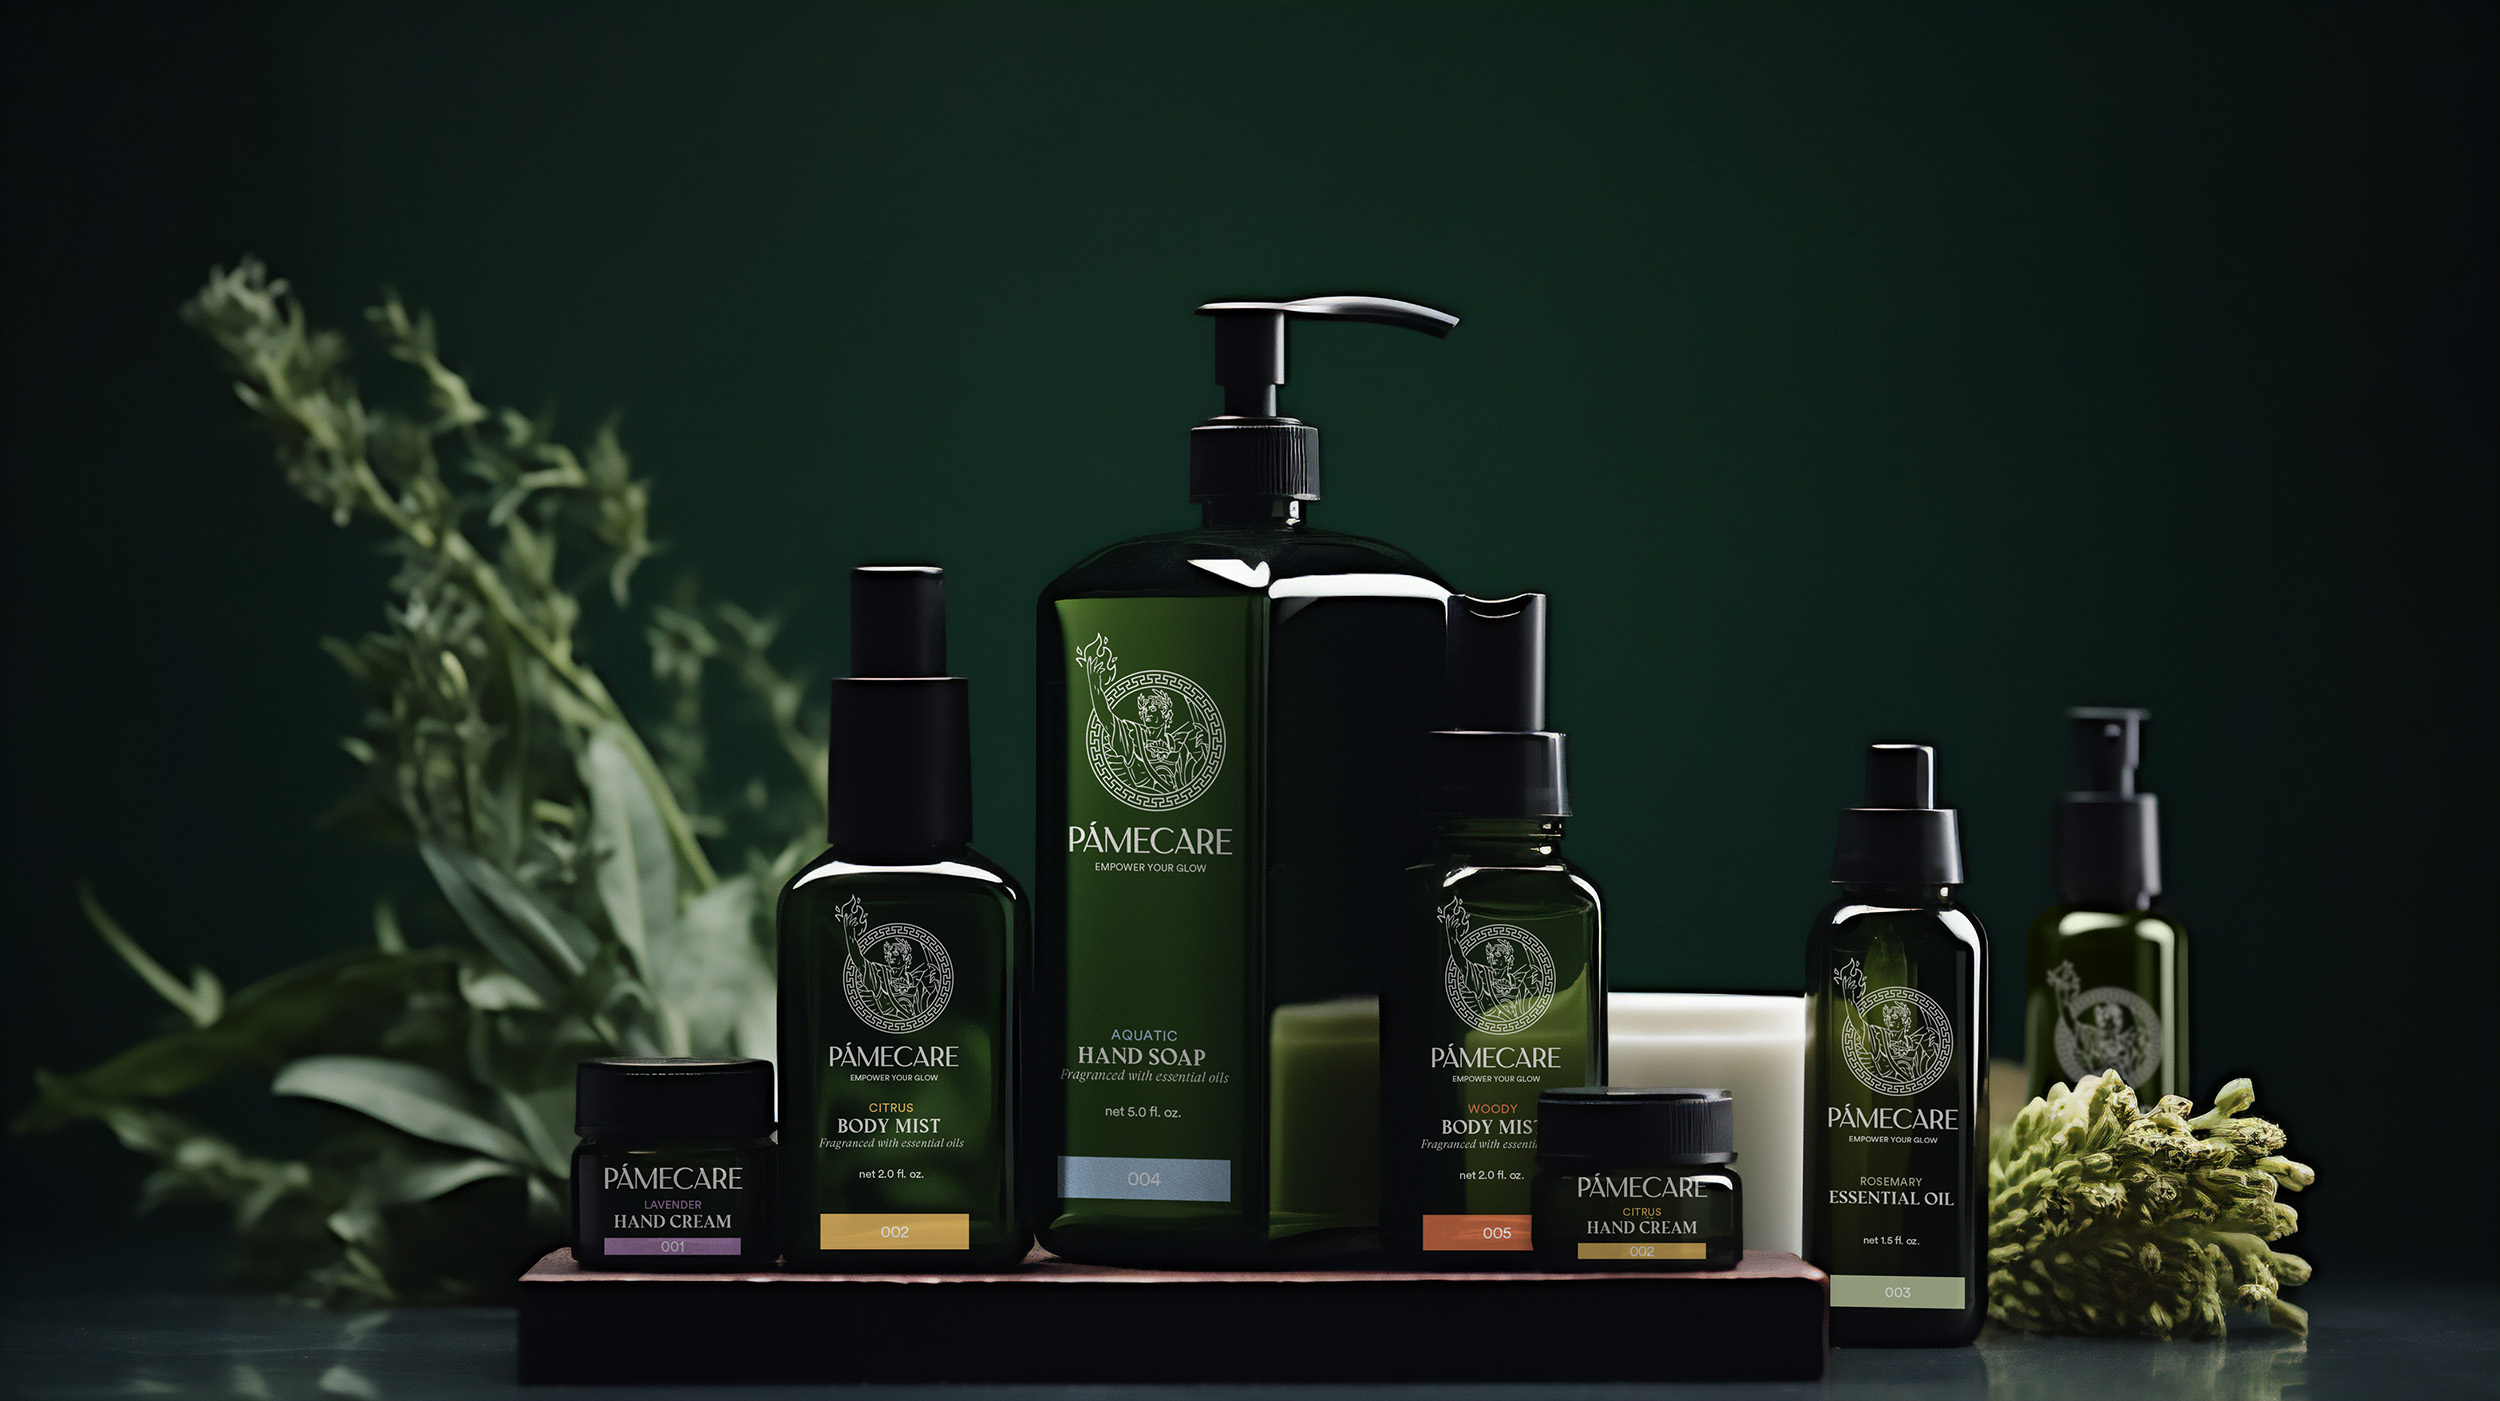 PameCare: Branding for Personal Care and Wellness Product Line